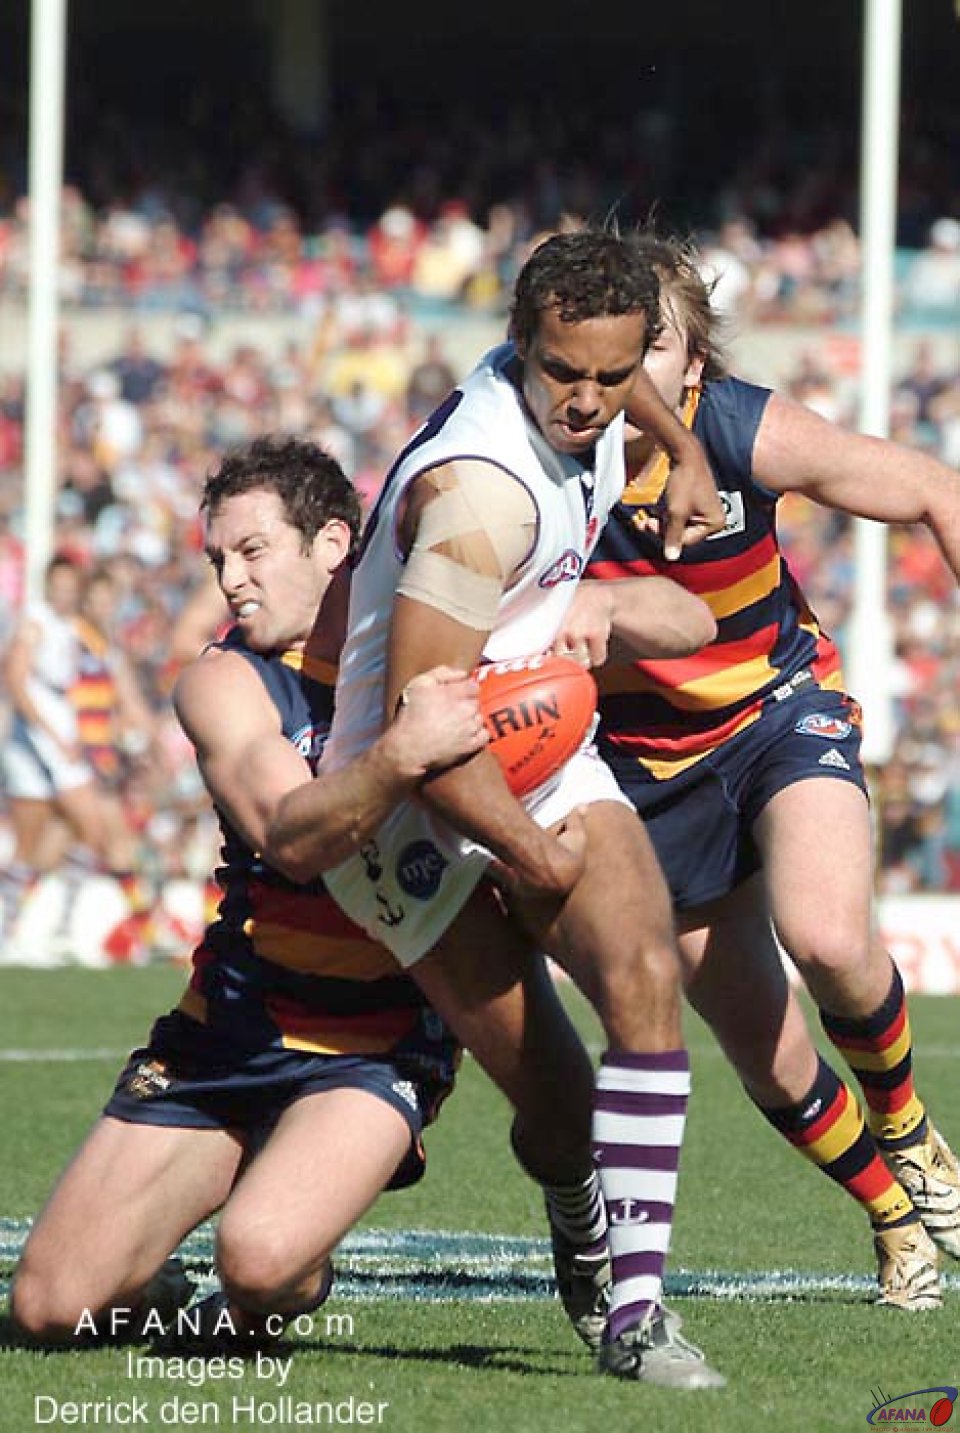 [b]The pressure of a close finish is evident in the Frematle and Crows play[/b]